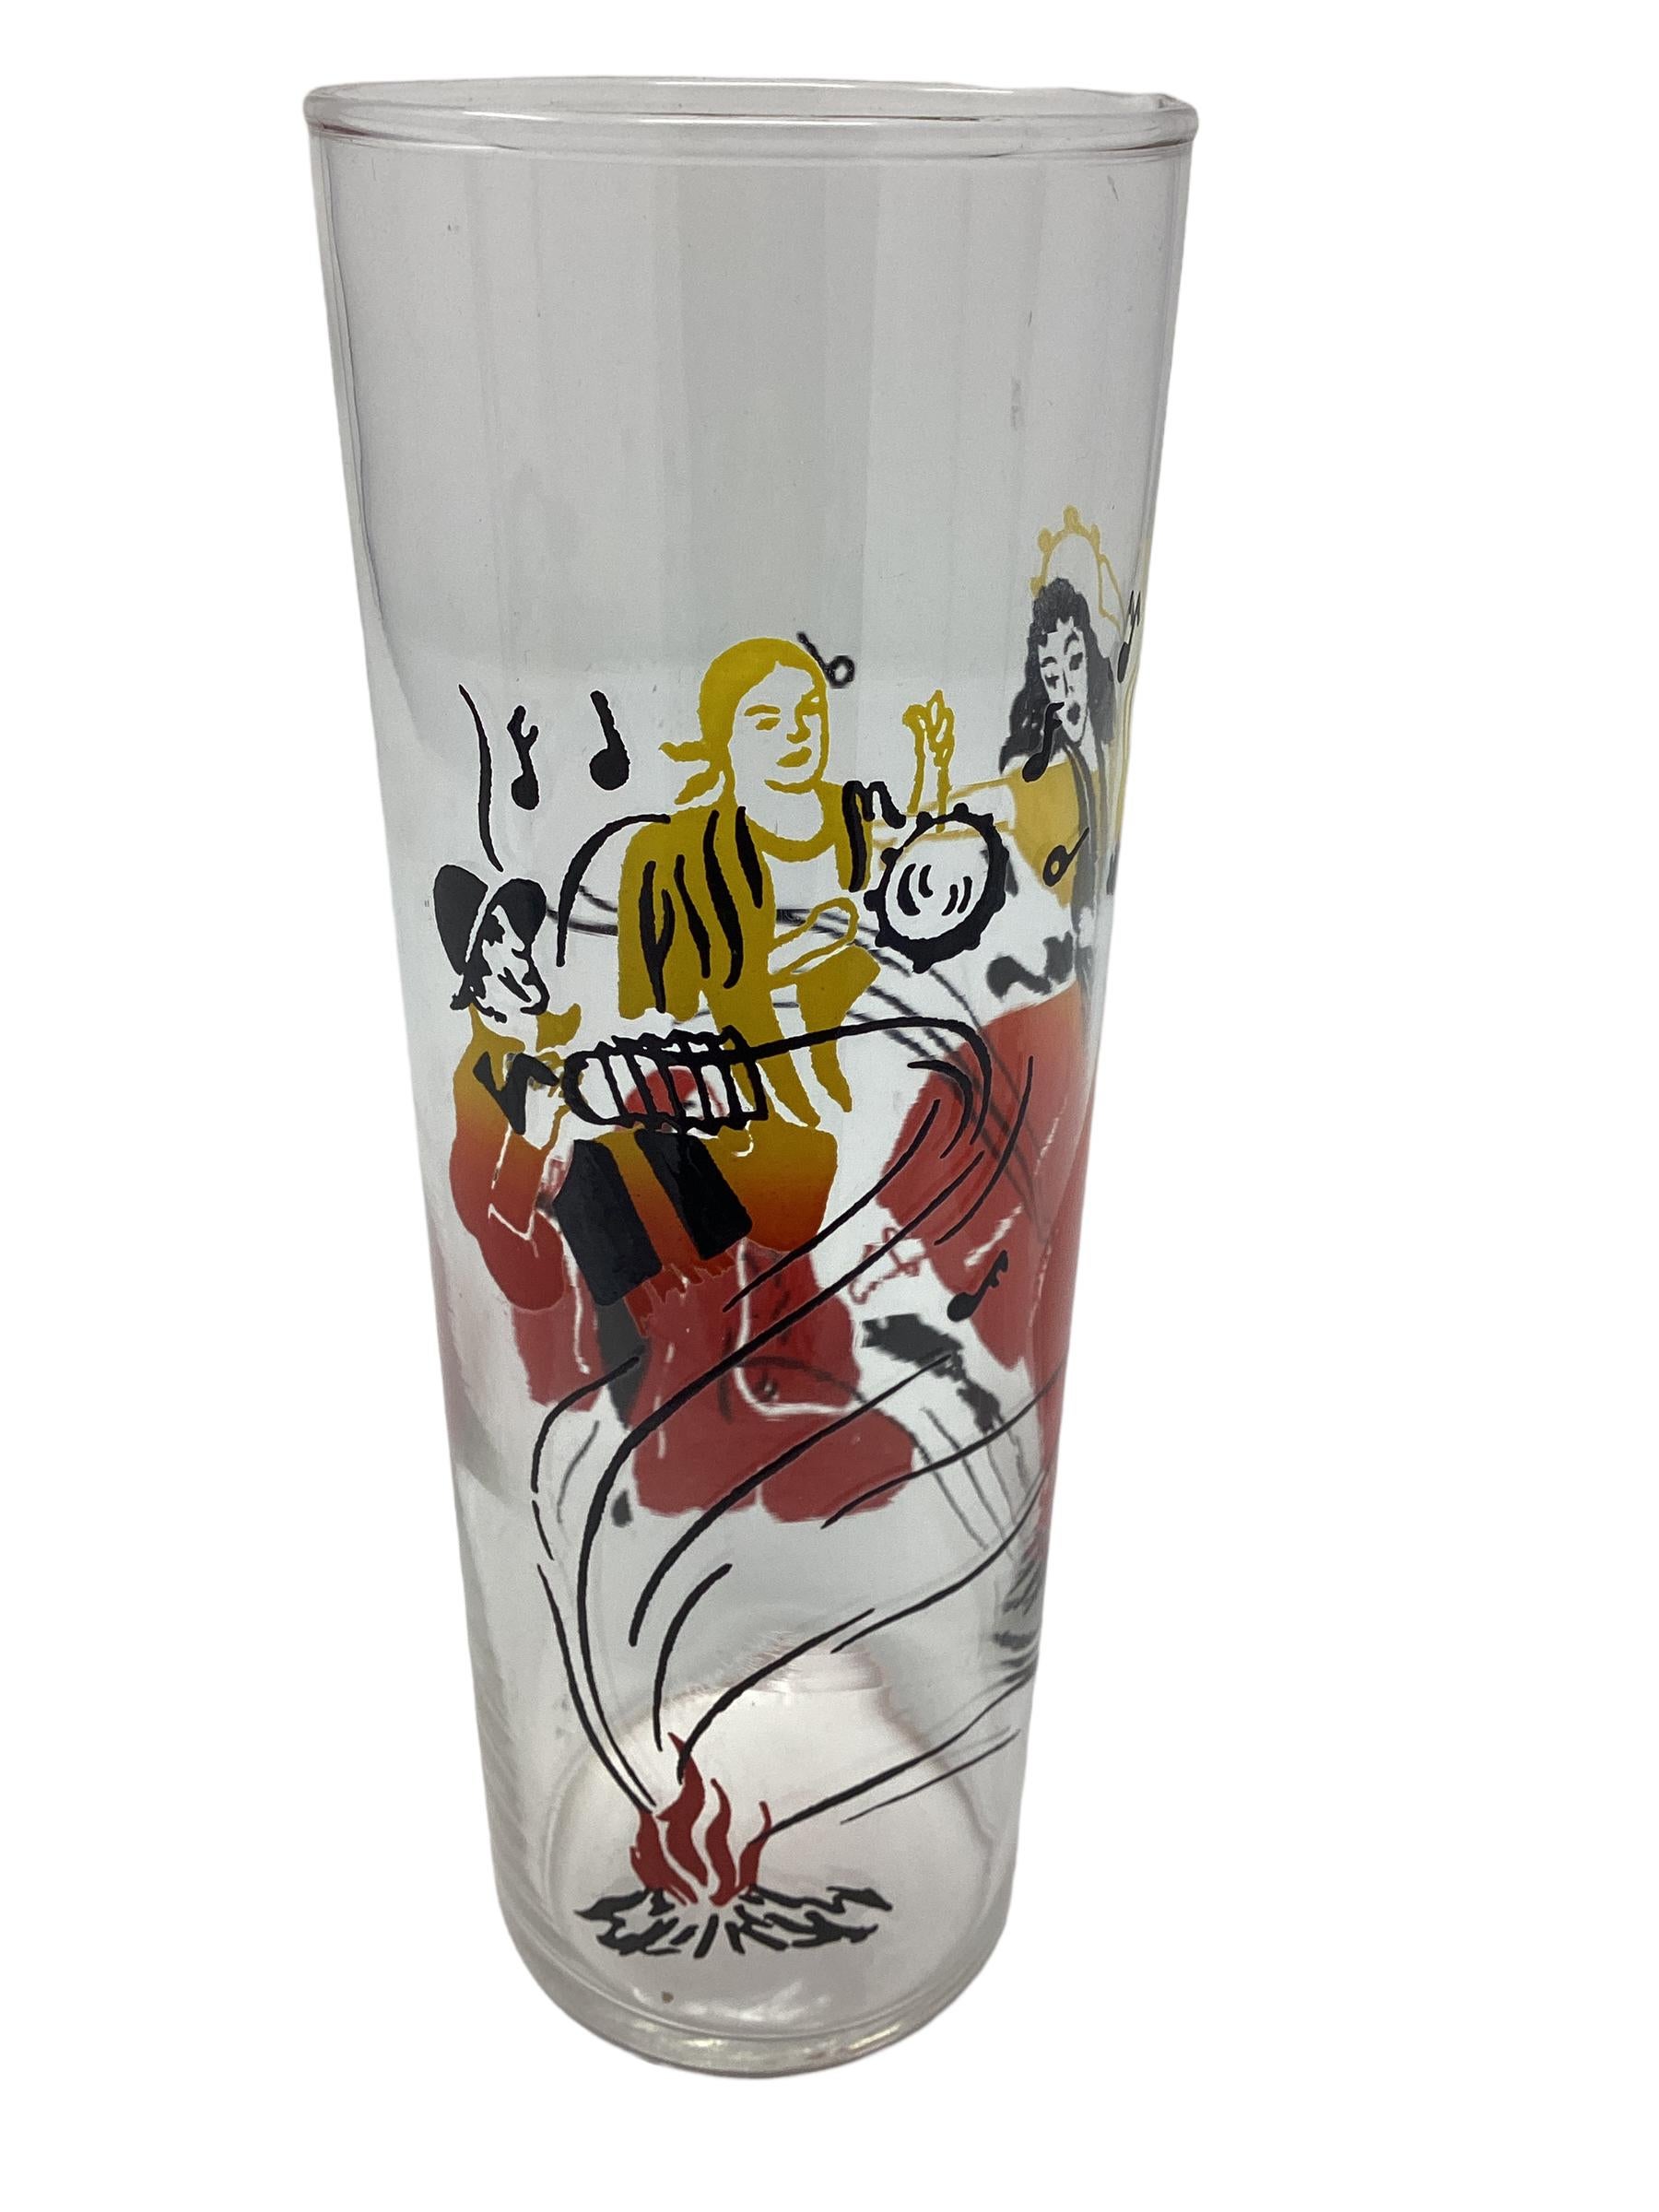 Vintage Federal Glass Tom Collins Flamenco Dancer Glasses - Set of 6 In Good Condition For Sale In Chapel Hill, NC